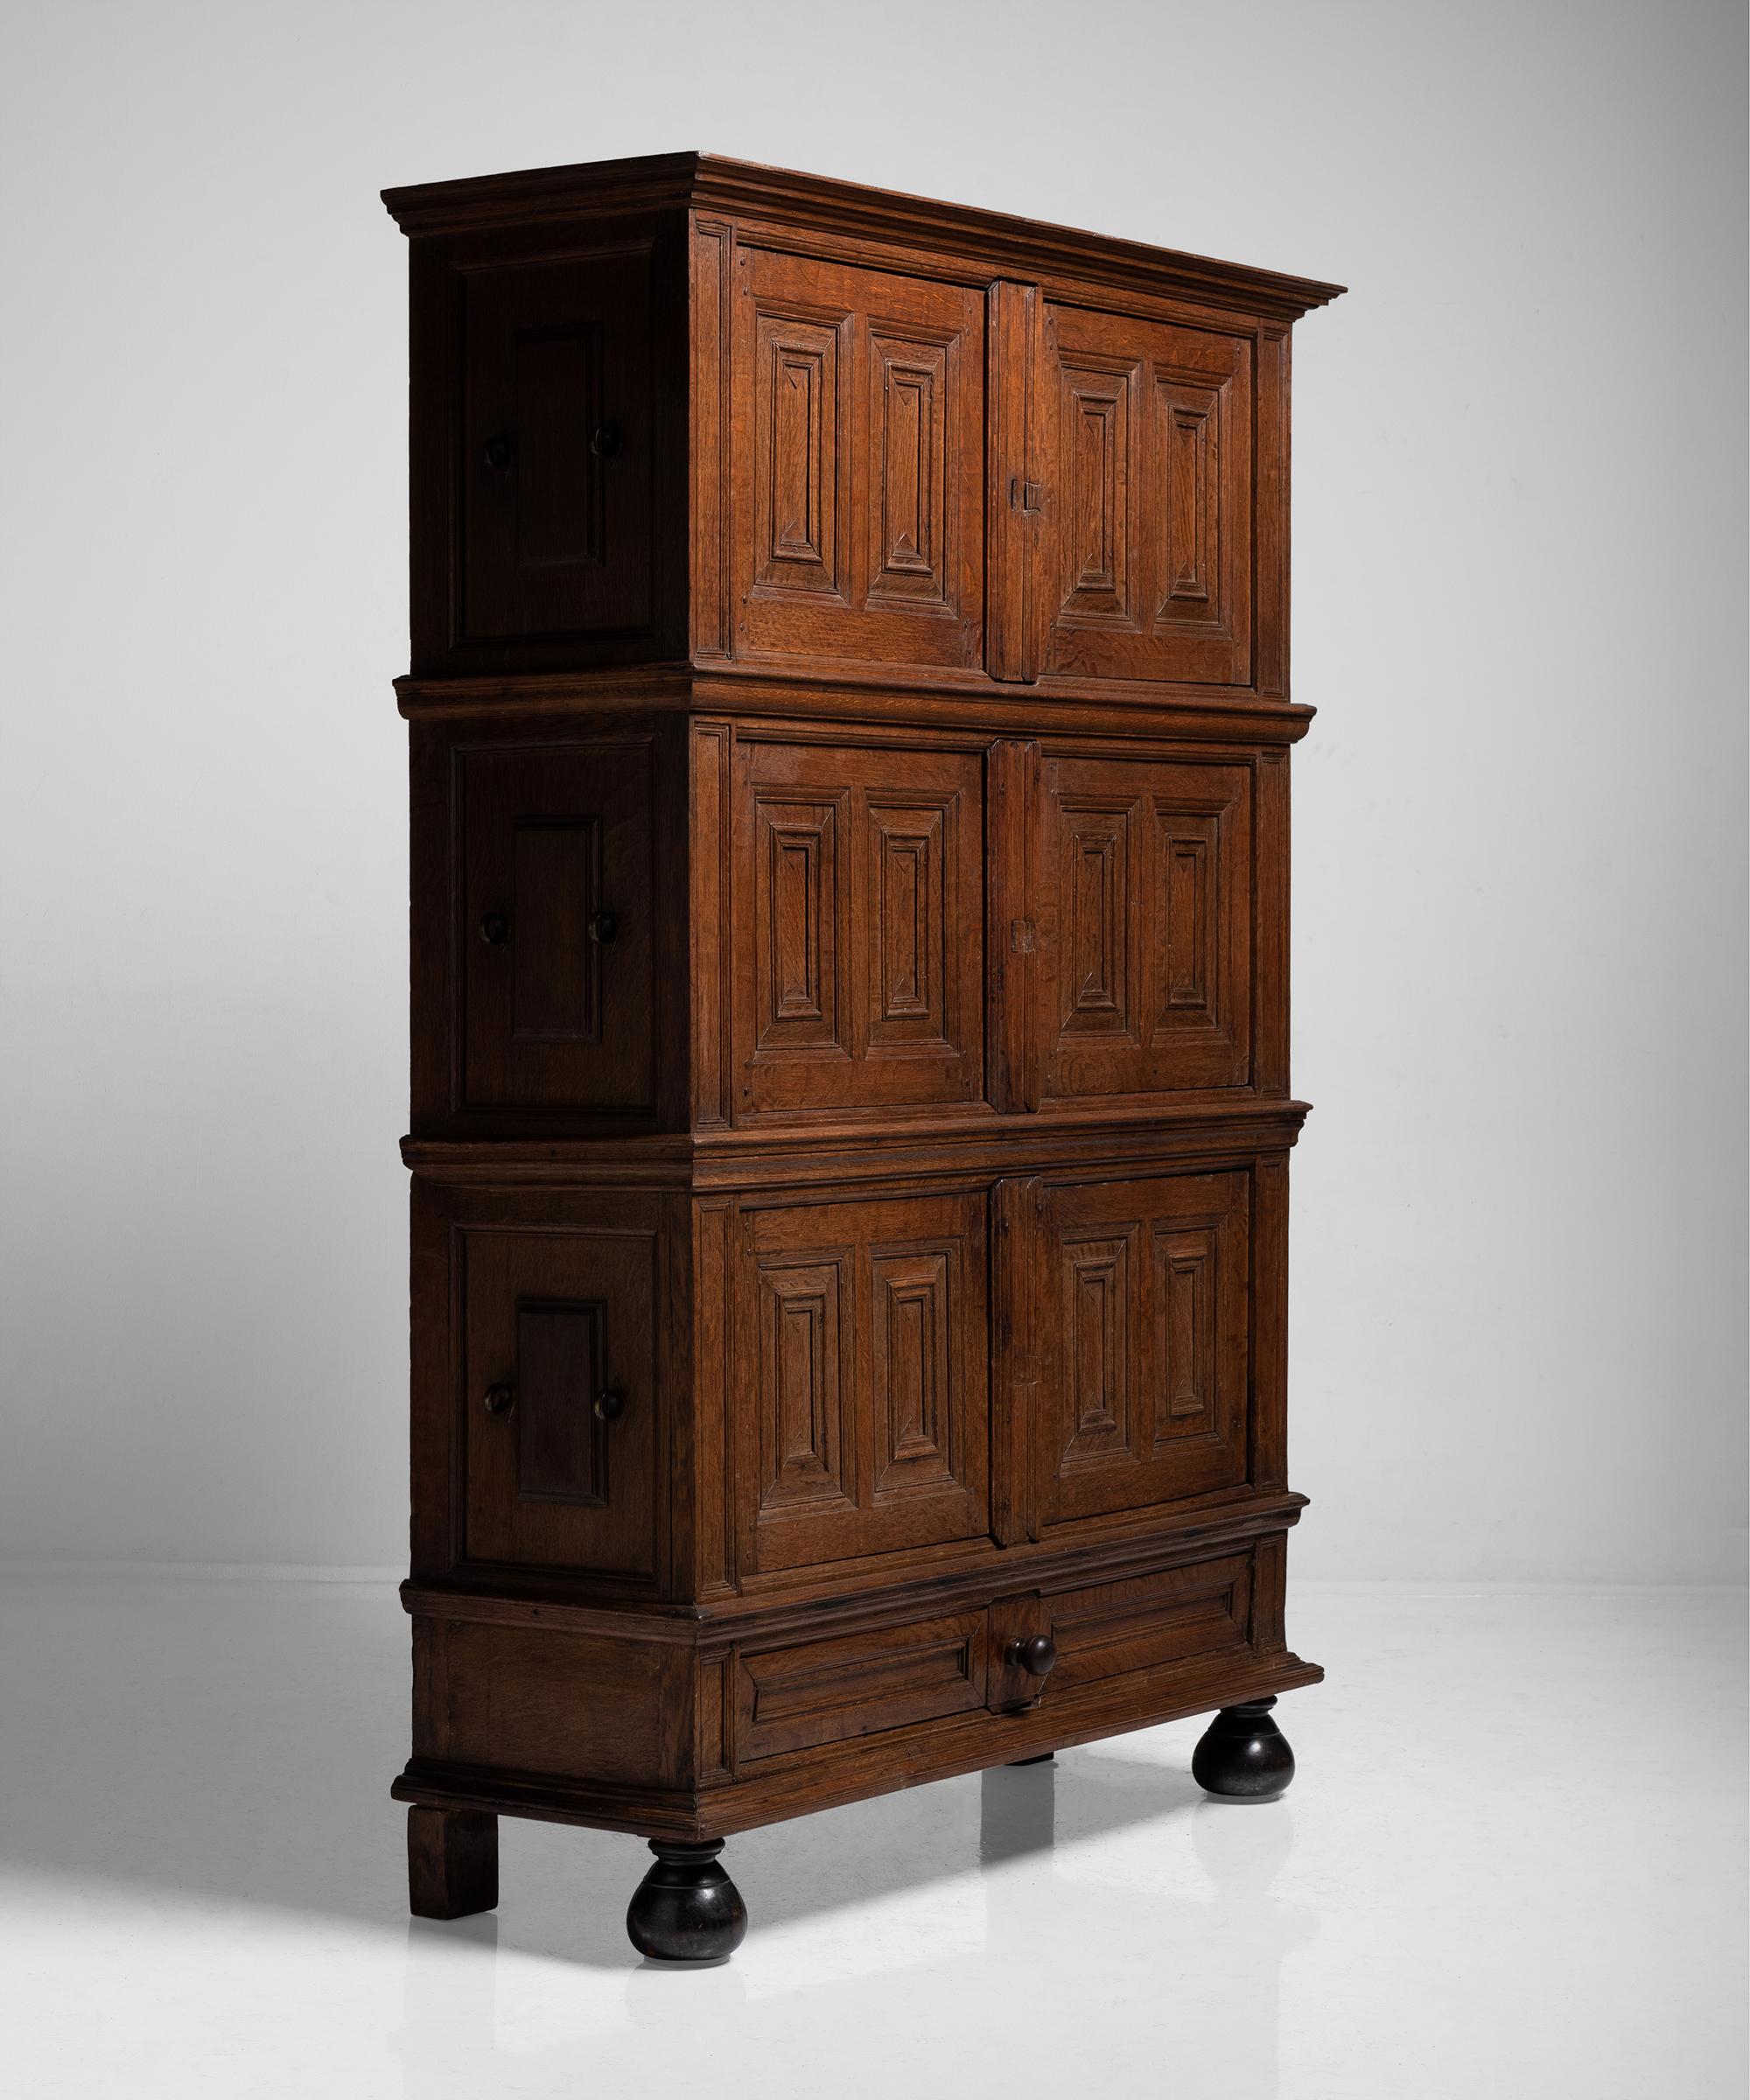 Oak Renaissance cabinet, Netherlands, circa 1650.

Constructed in oak. Made in three sections, each section having its original bronze carrying handle on the side.

Measures: 59.75” W x 20.75” D x 87.25” H.